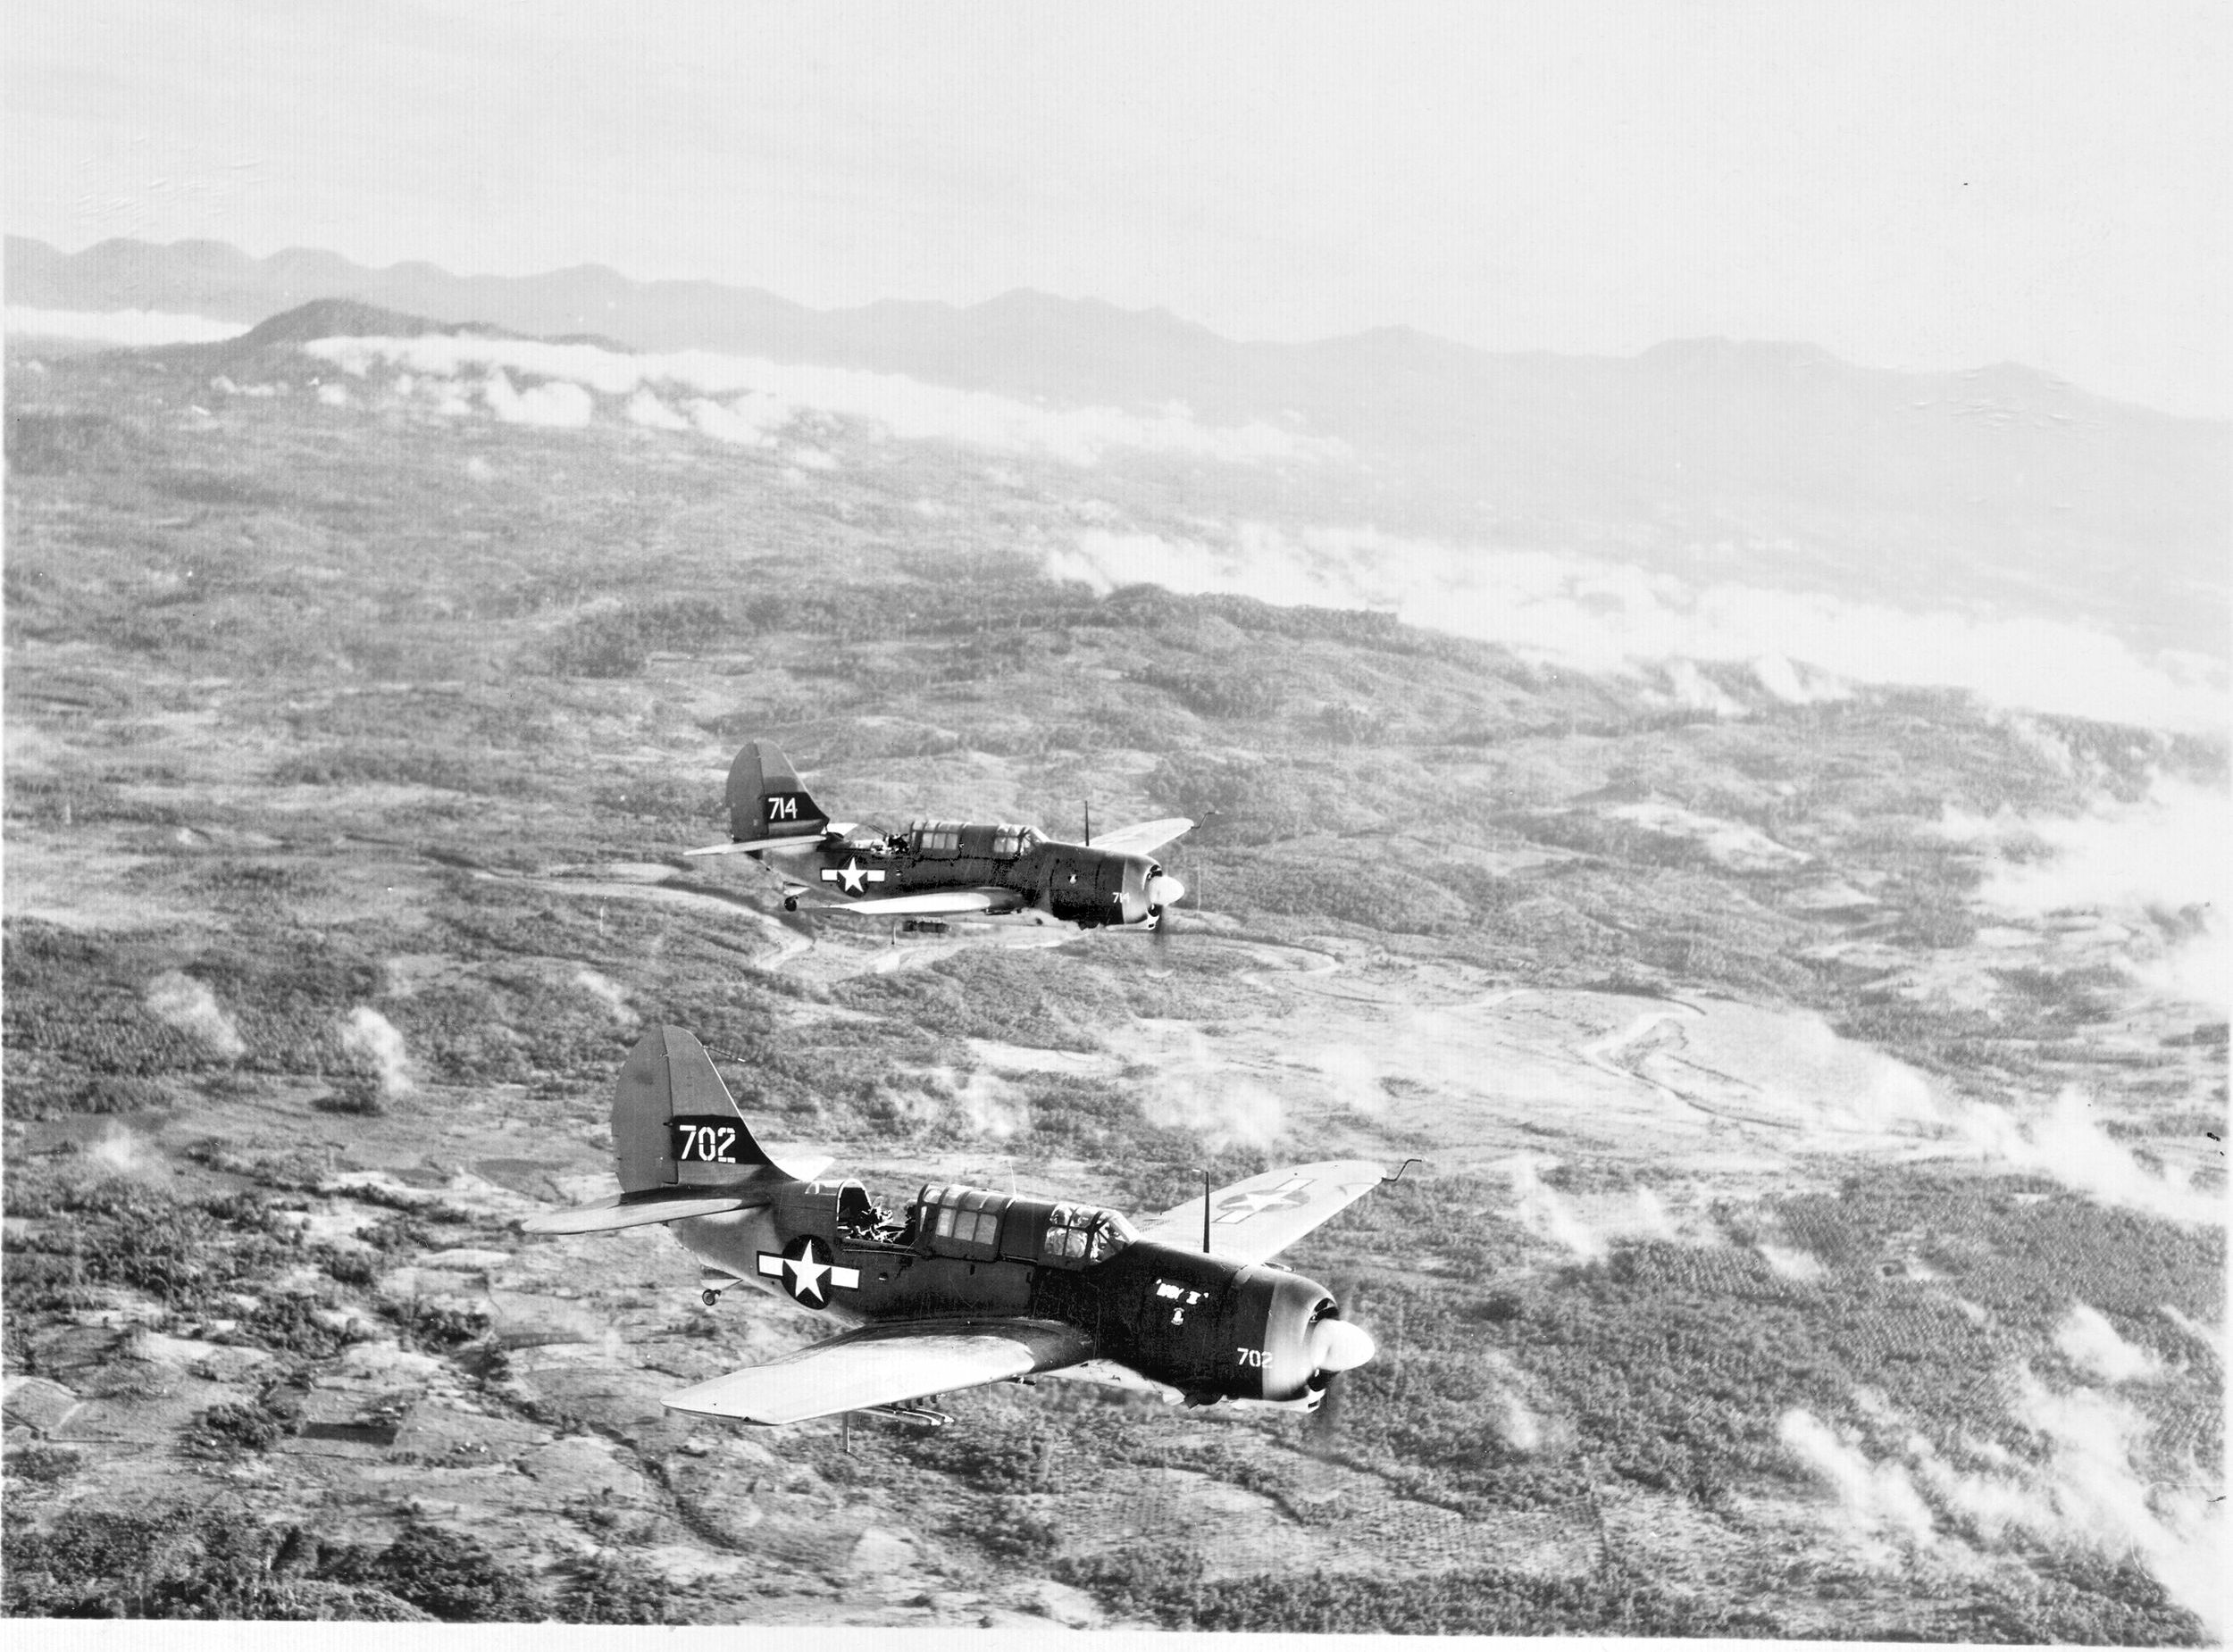 Curtiss SB2Cs (“Helldivers”) of VMSB-244 fly over Mindanao on a close air mission in support of Army ground troops, June 1945. Although not as common as the Dauntlesses and Corsairs, the two-seat SB2Cs packed plenty of precision punch.